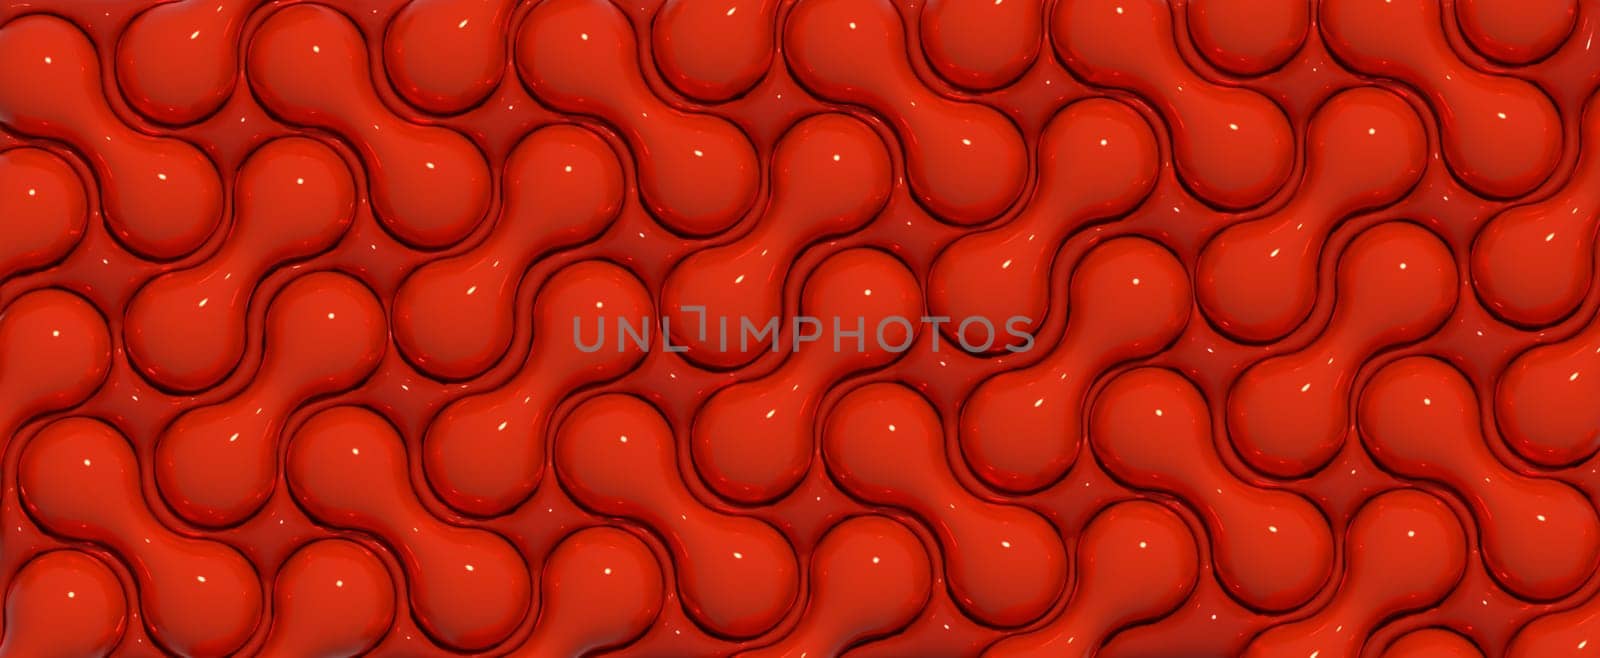 Abstract red background with various inflated figures, 3D rendering illustration